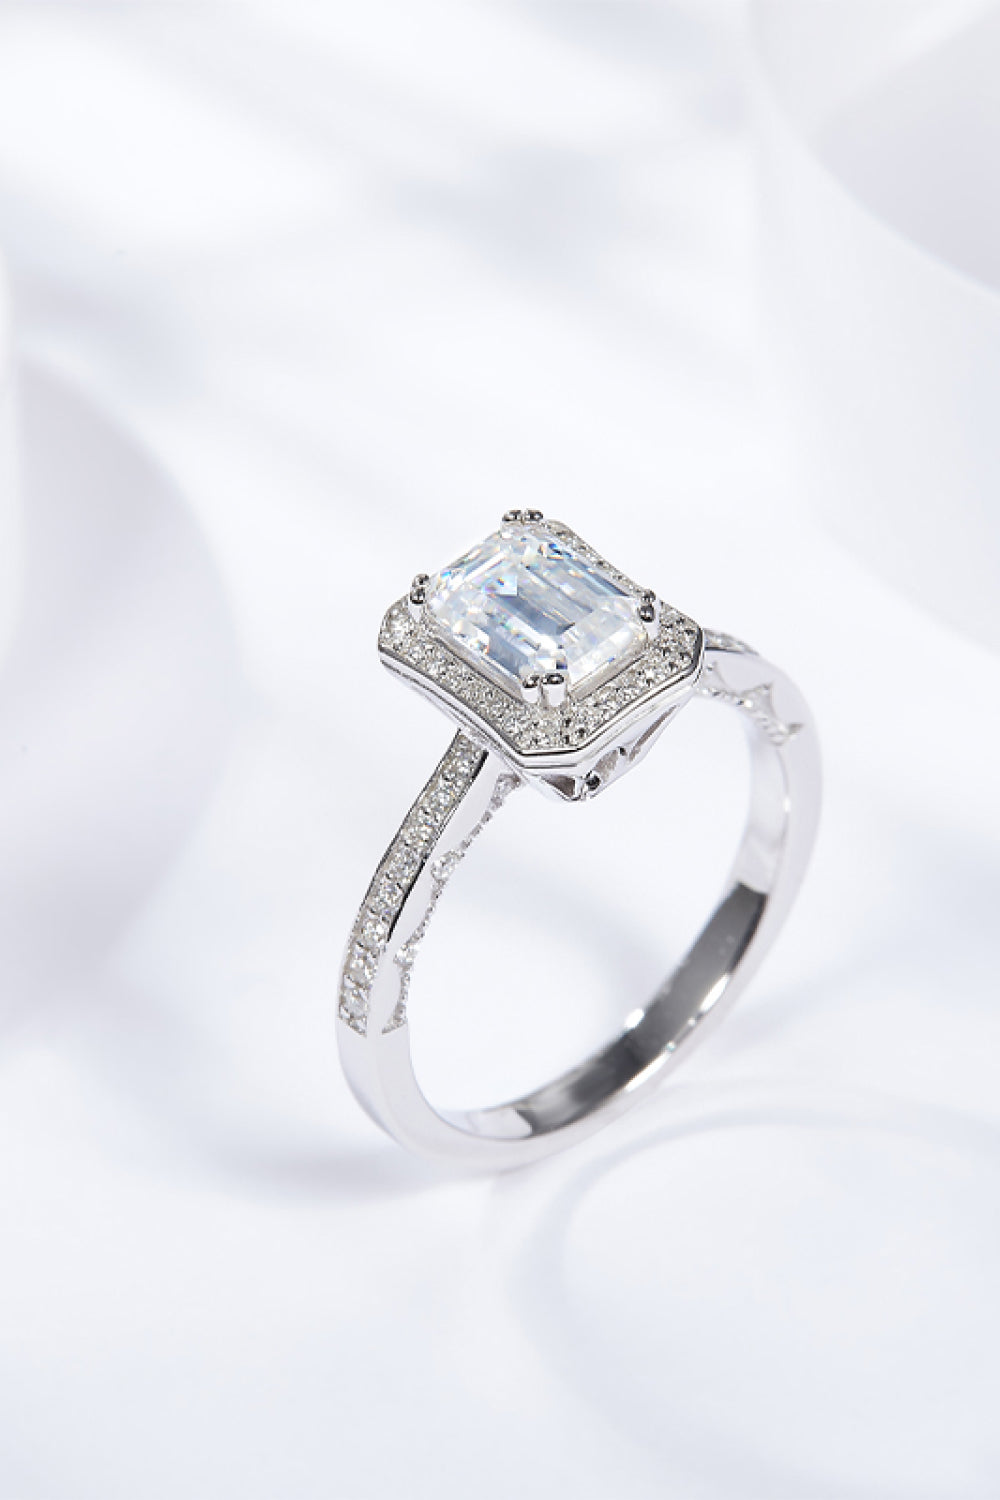 1 Carat Emerald-Cut Moissanite Platinum Over Pure Sterling Silver Halo Ring - Sparkala